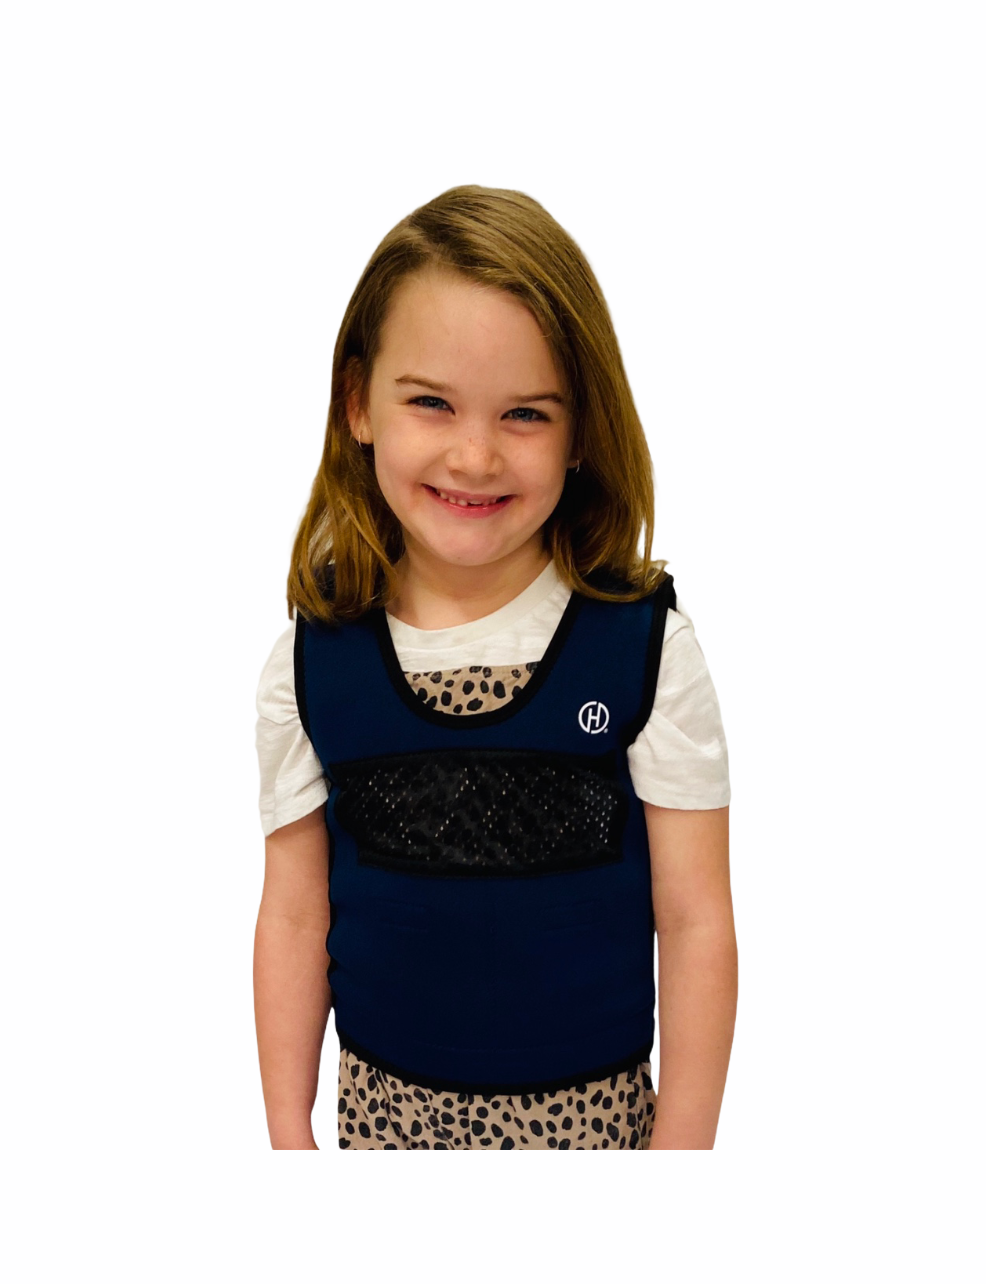 young girl smiling wearing the navy blue Harkla Weighted Compression Vest - Small with white background